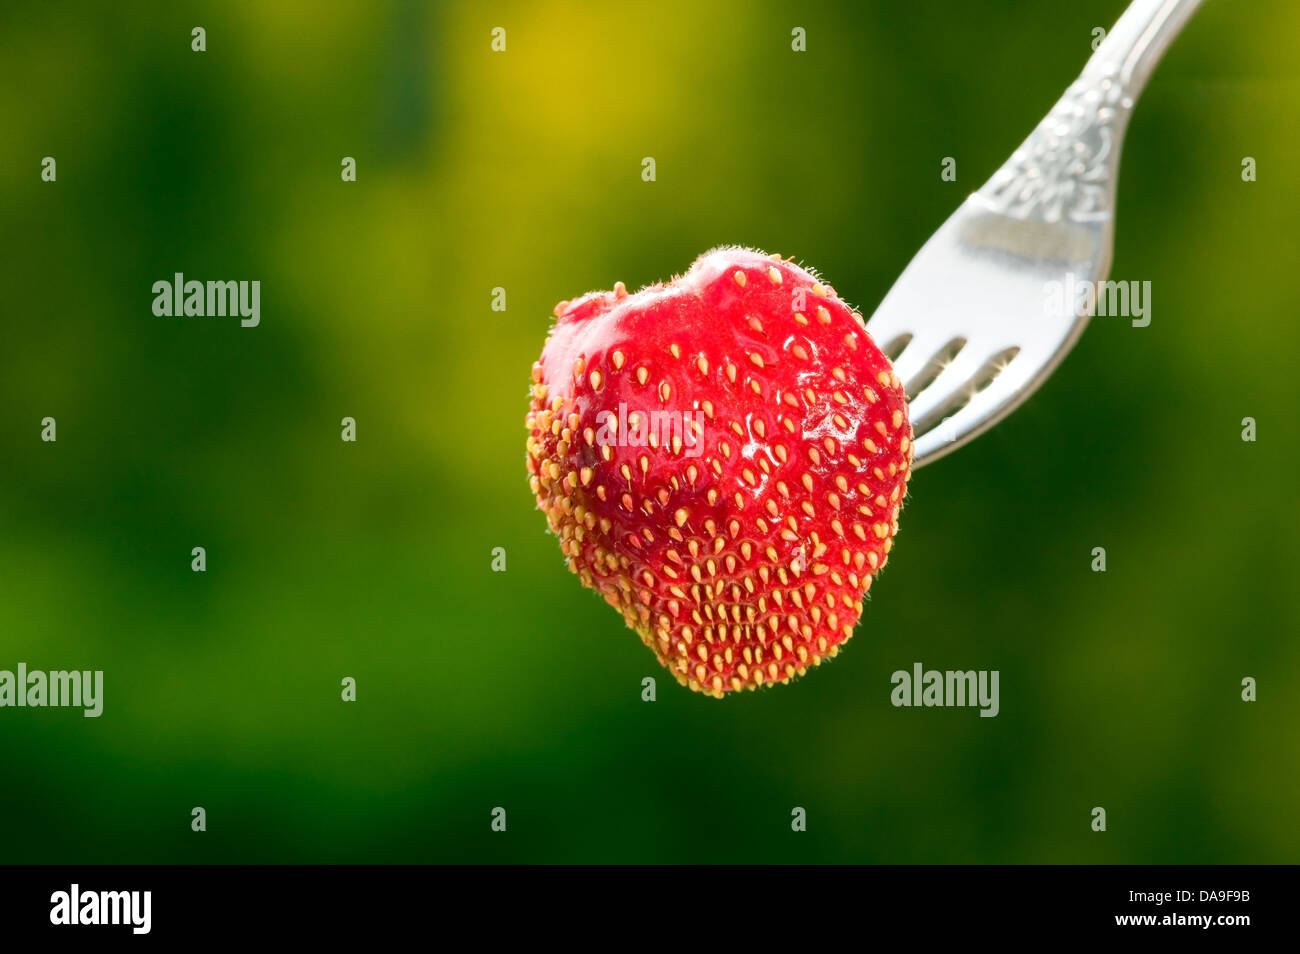 Red strawberry on green nature background, food concept Stock Photo